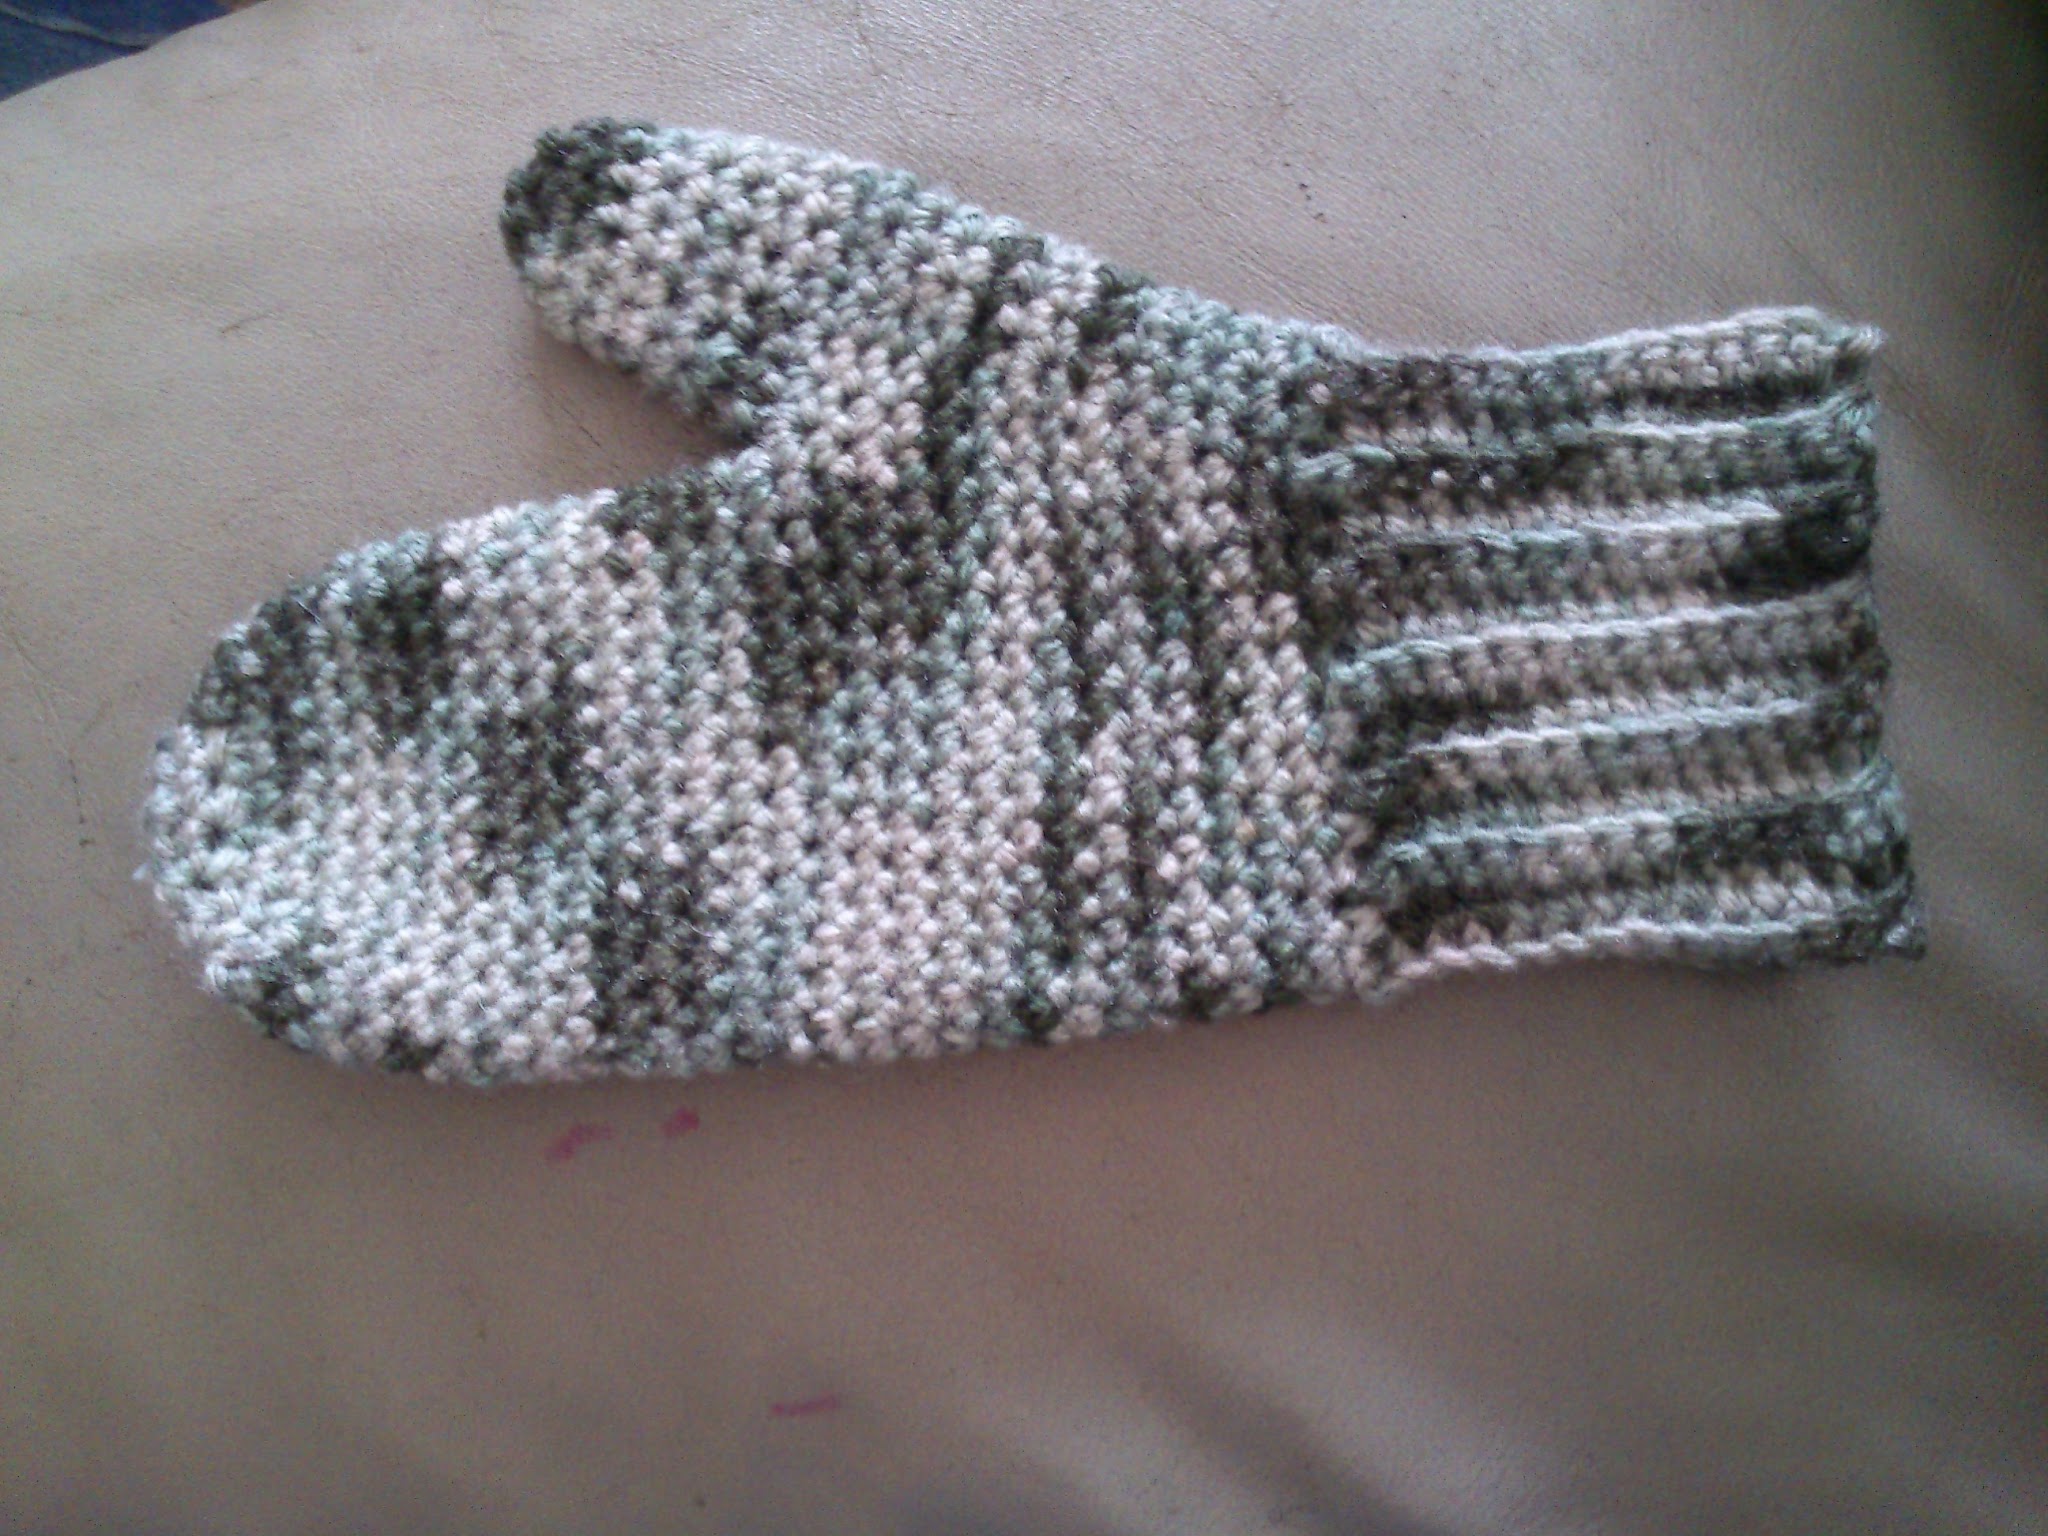 Finished another set of mittens